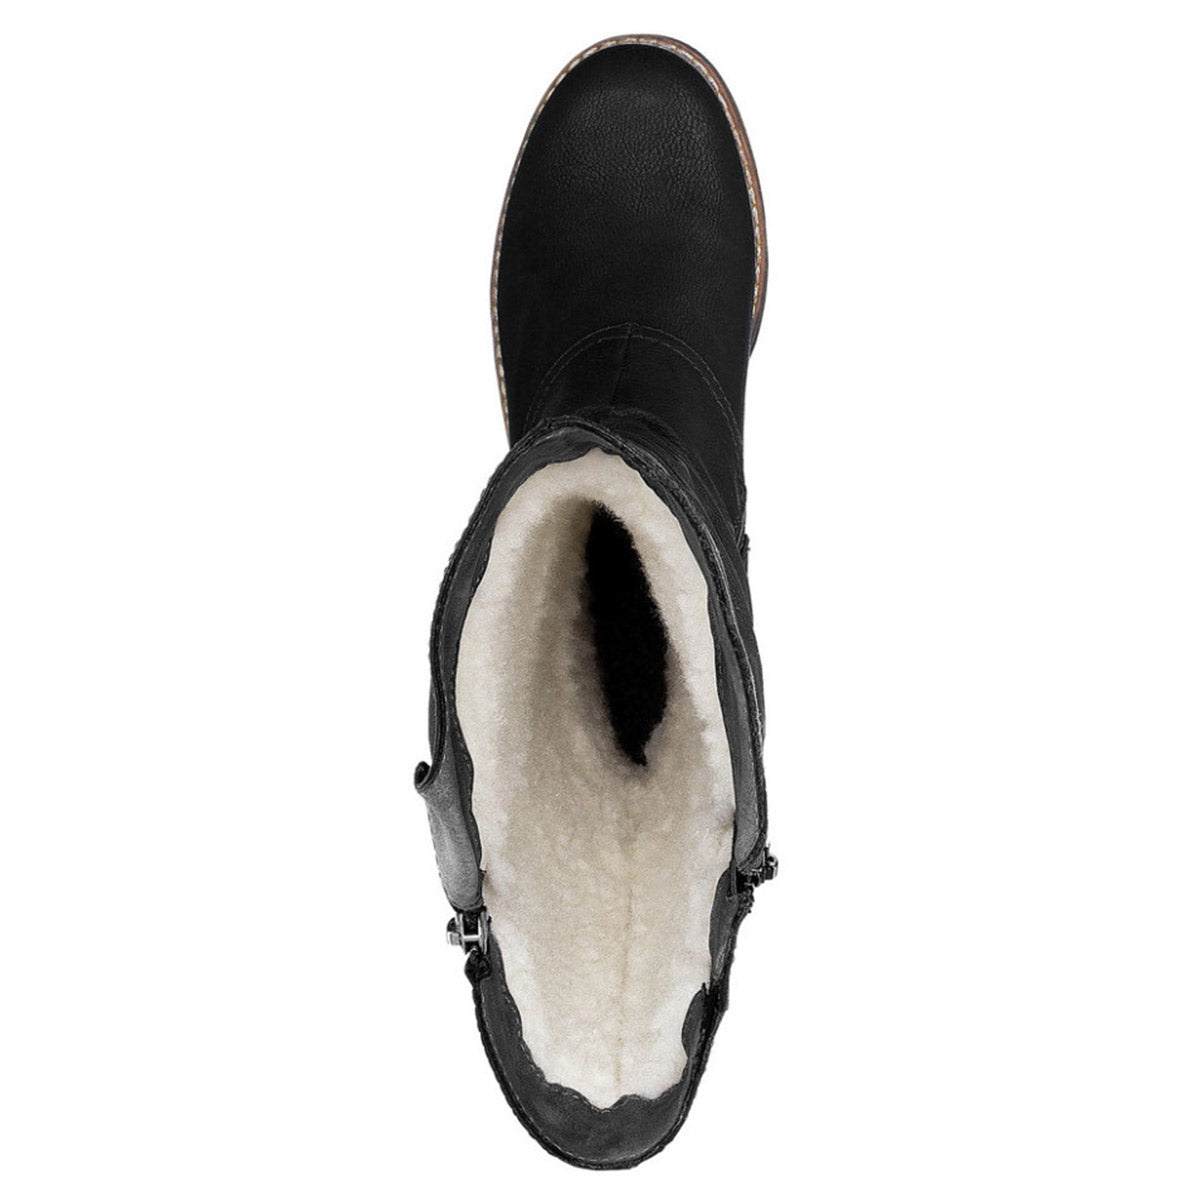 Top view of a black RIEKER FABRIZIA 52 BLACK - WOMENS winter boot with a faux fur lining, illustrating the opening and interior texture, featuring a cushioned footbed and water-resistant design from Rieker.